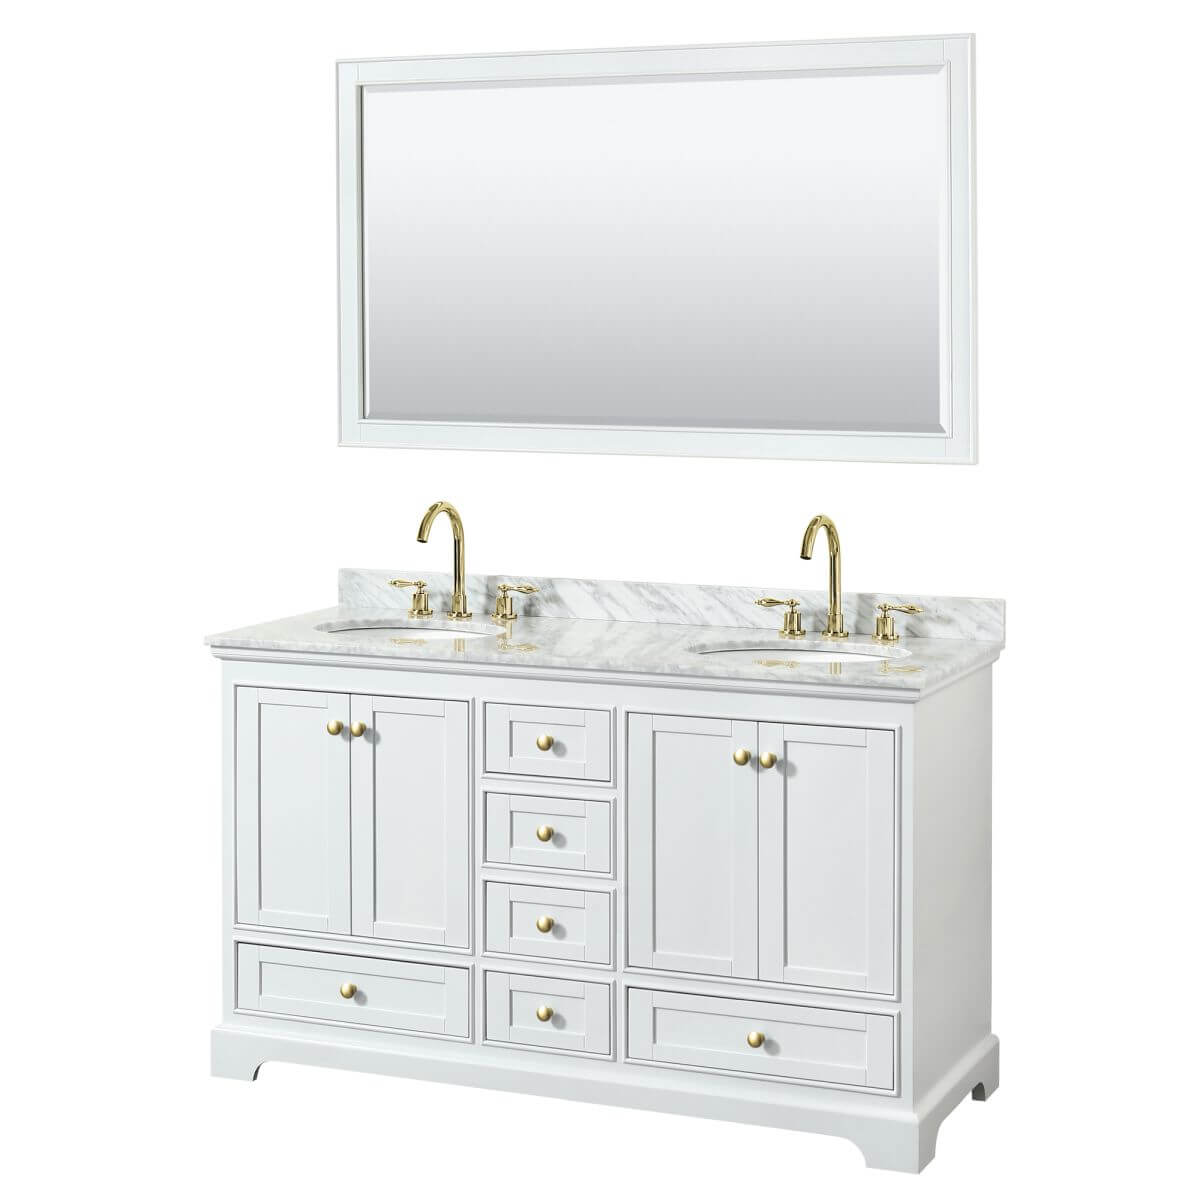 Wyndham Collection Deborah 60 inch Double Bathroom Vanity in White with White Carrara Marble Countertop, Undermount Oval Sinks, Brushed Gold Trim and 58 inch Mirror - WCS202060DWGCMUNOM58